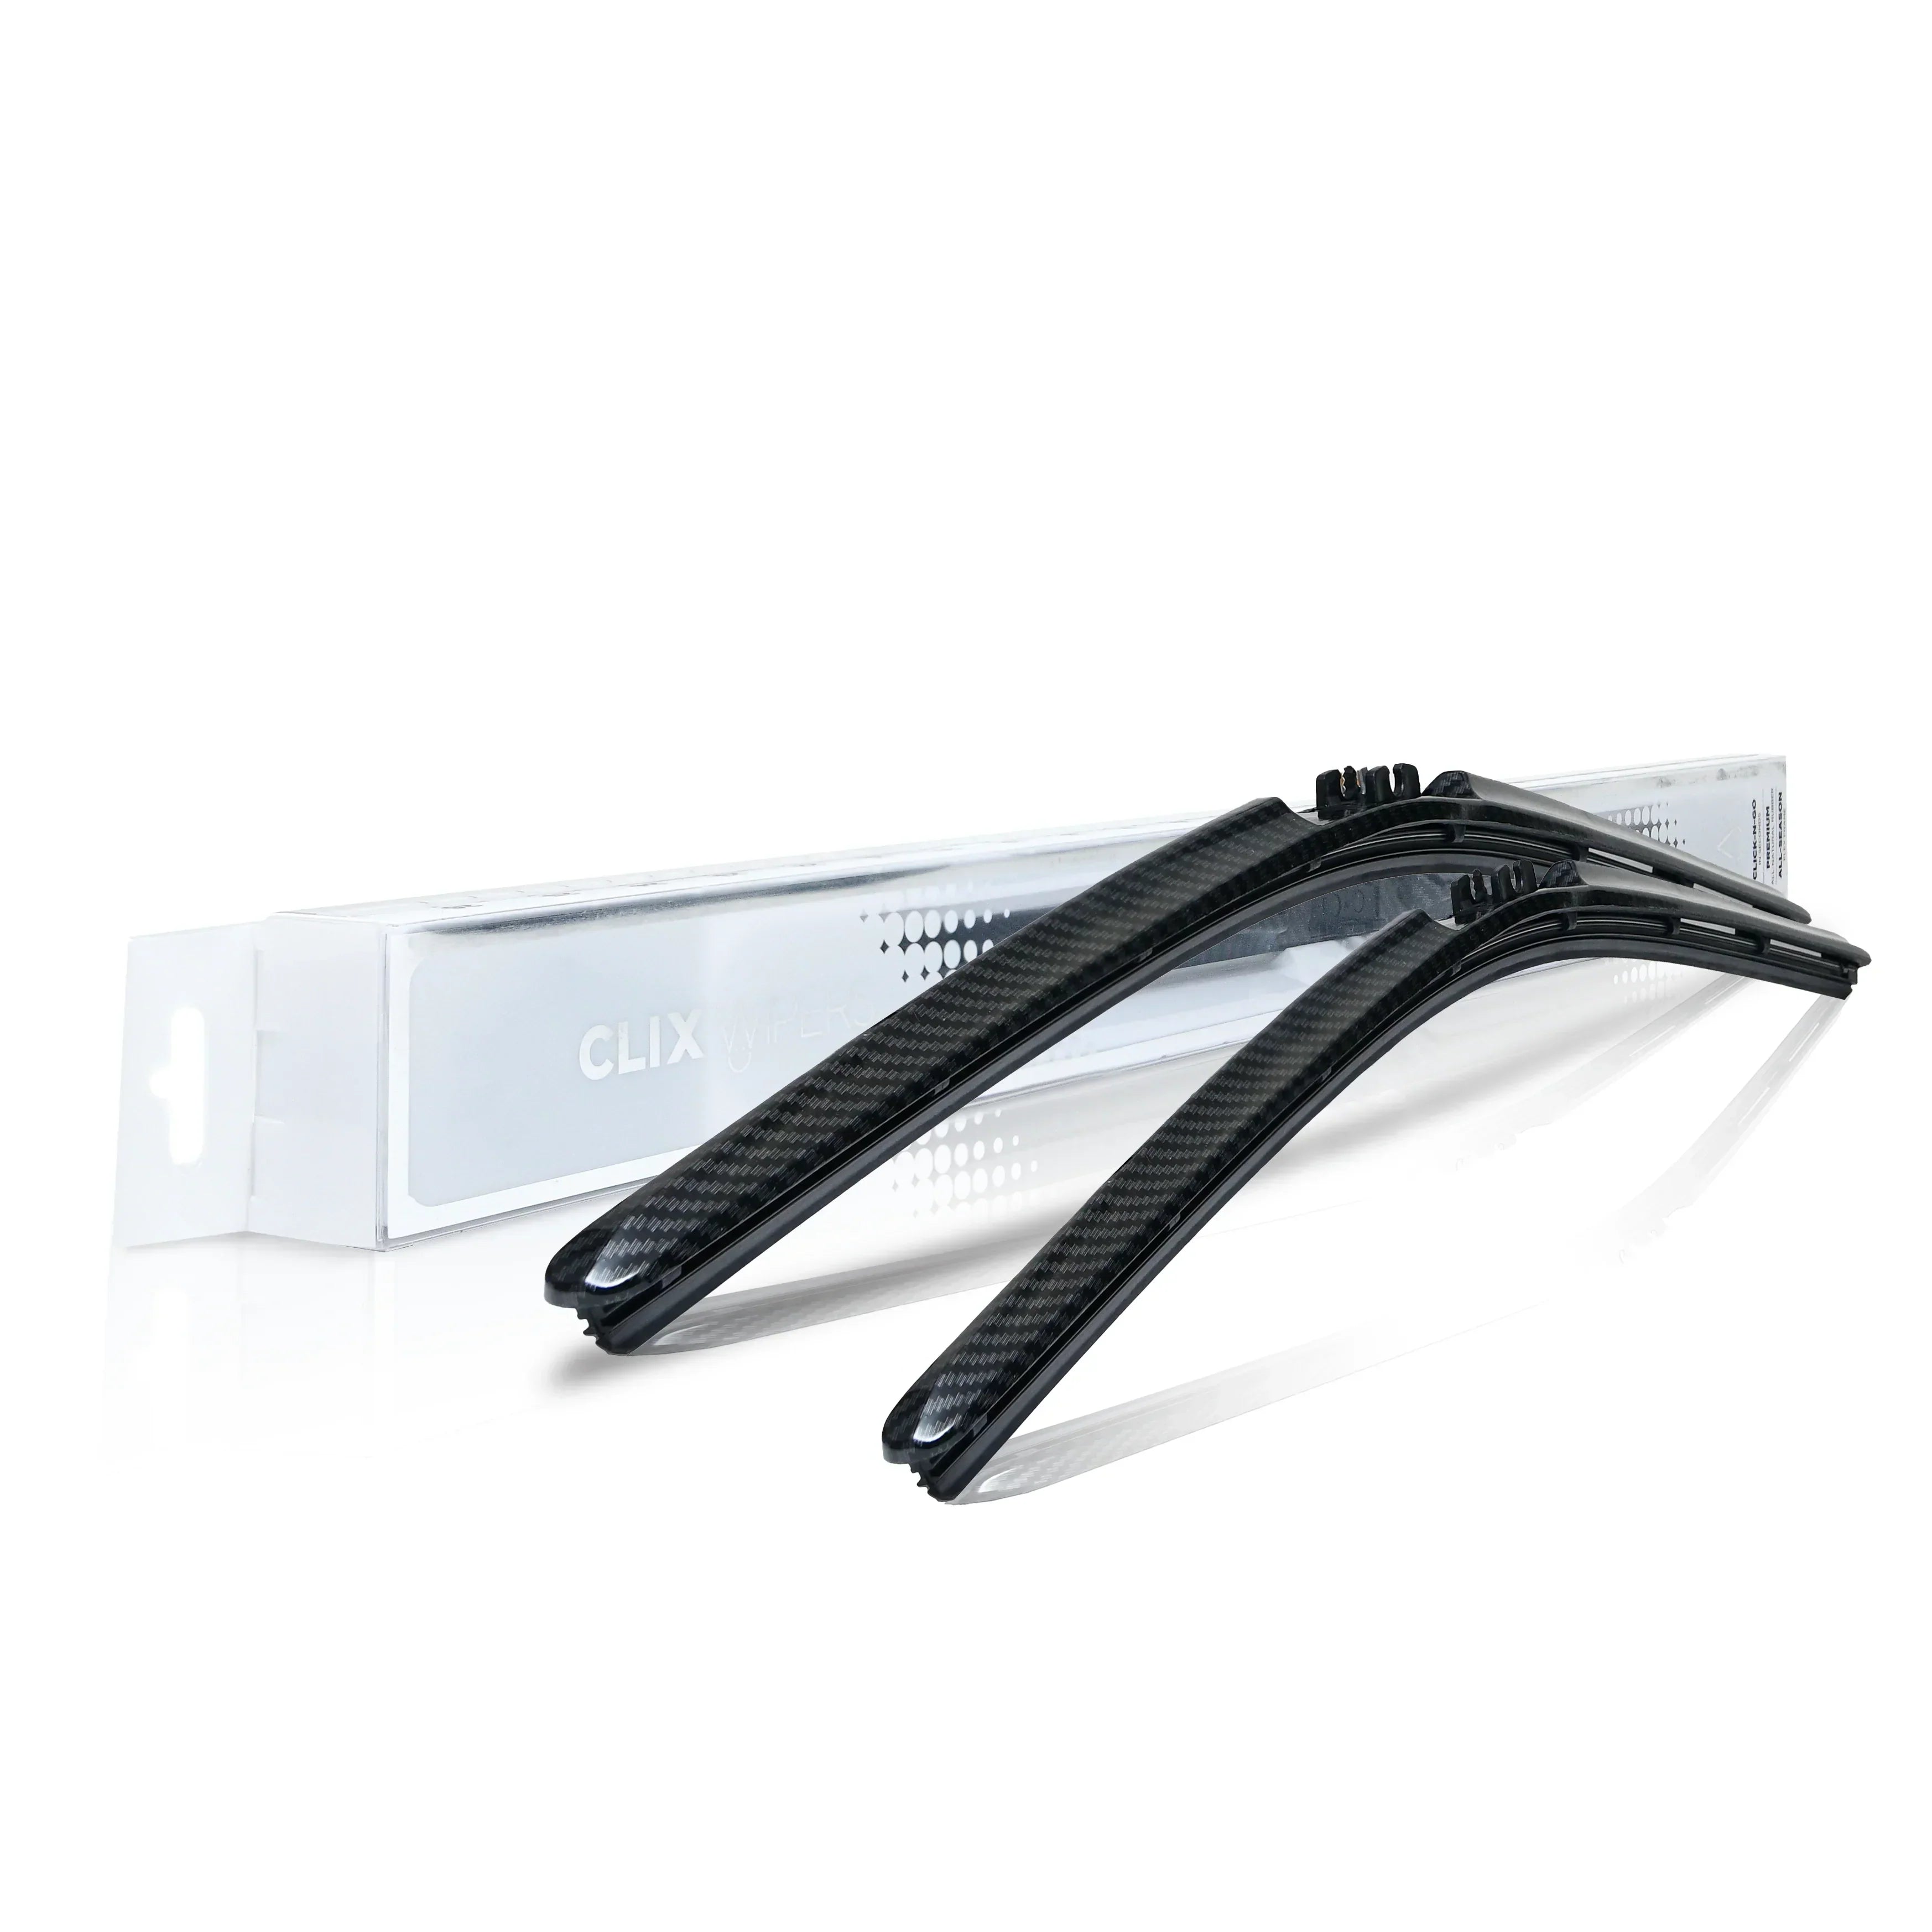 Buick Verano Windshield Wiper Blades Complete Front Set, Guarteeed